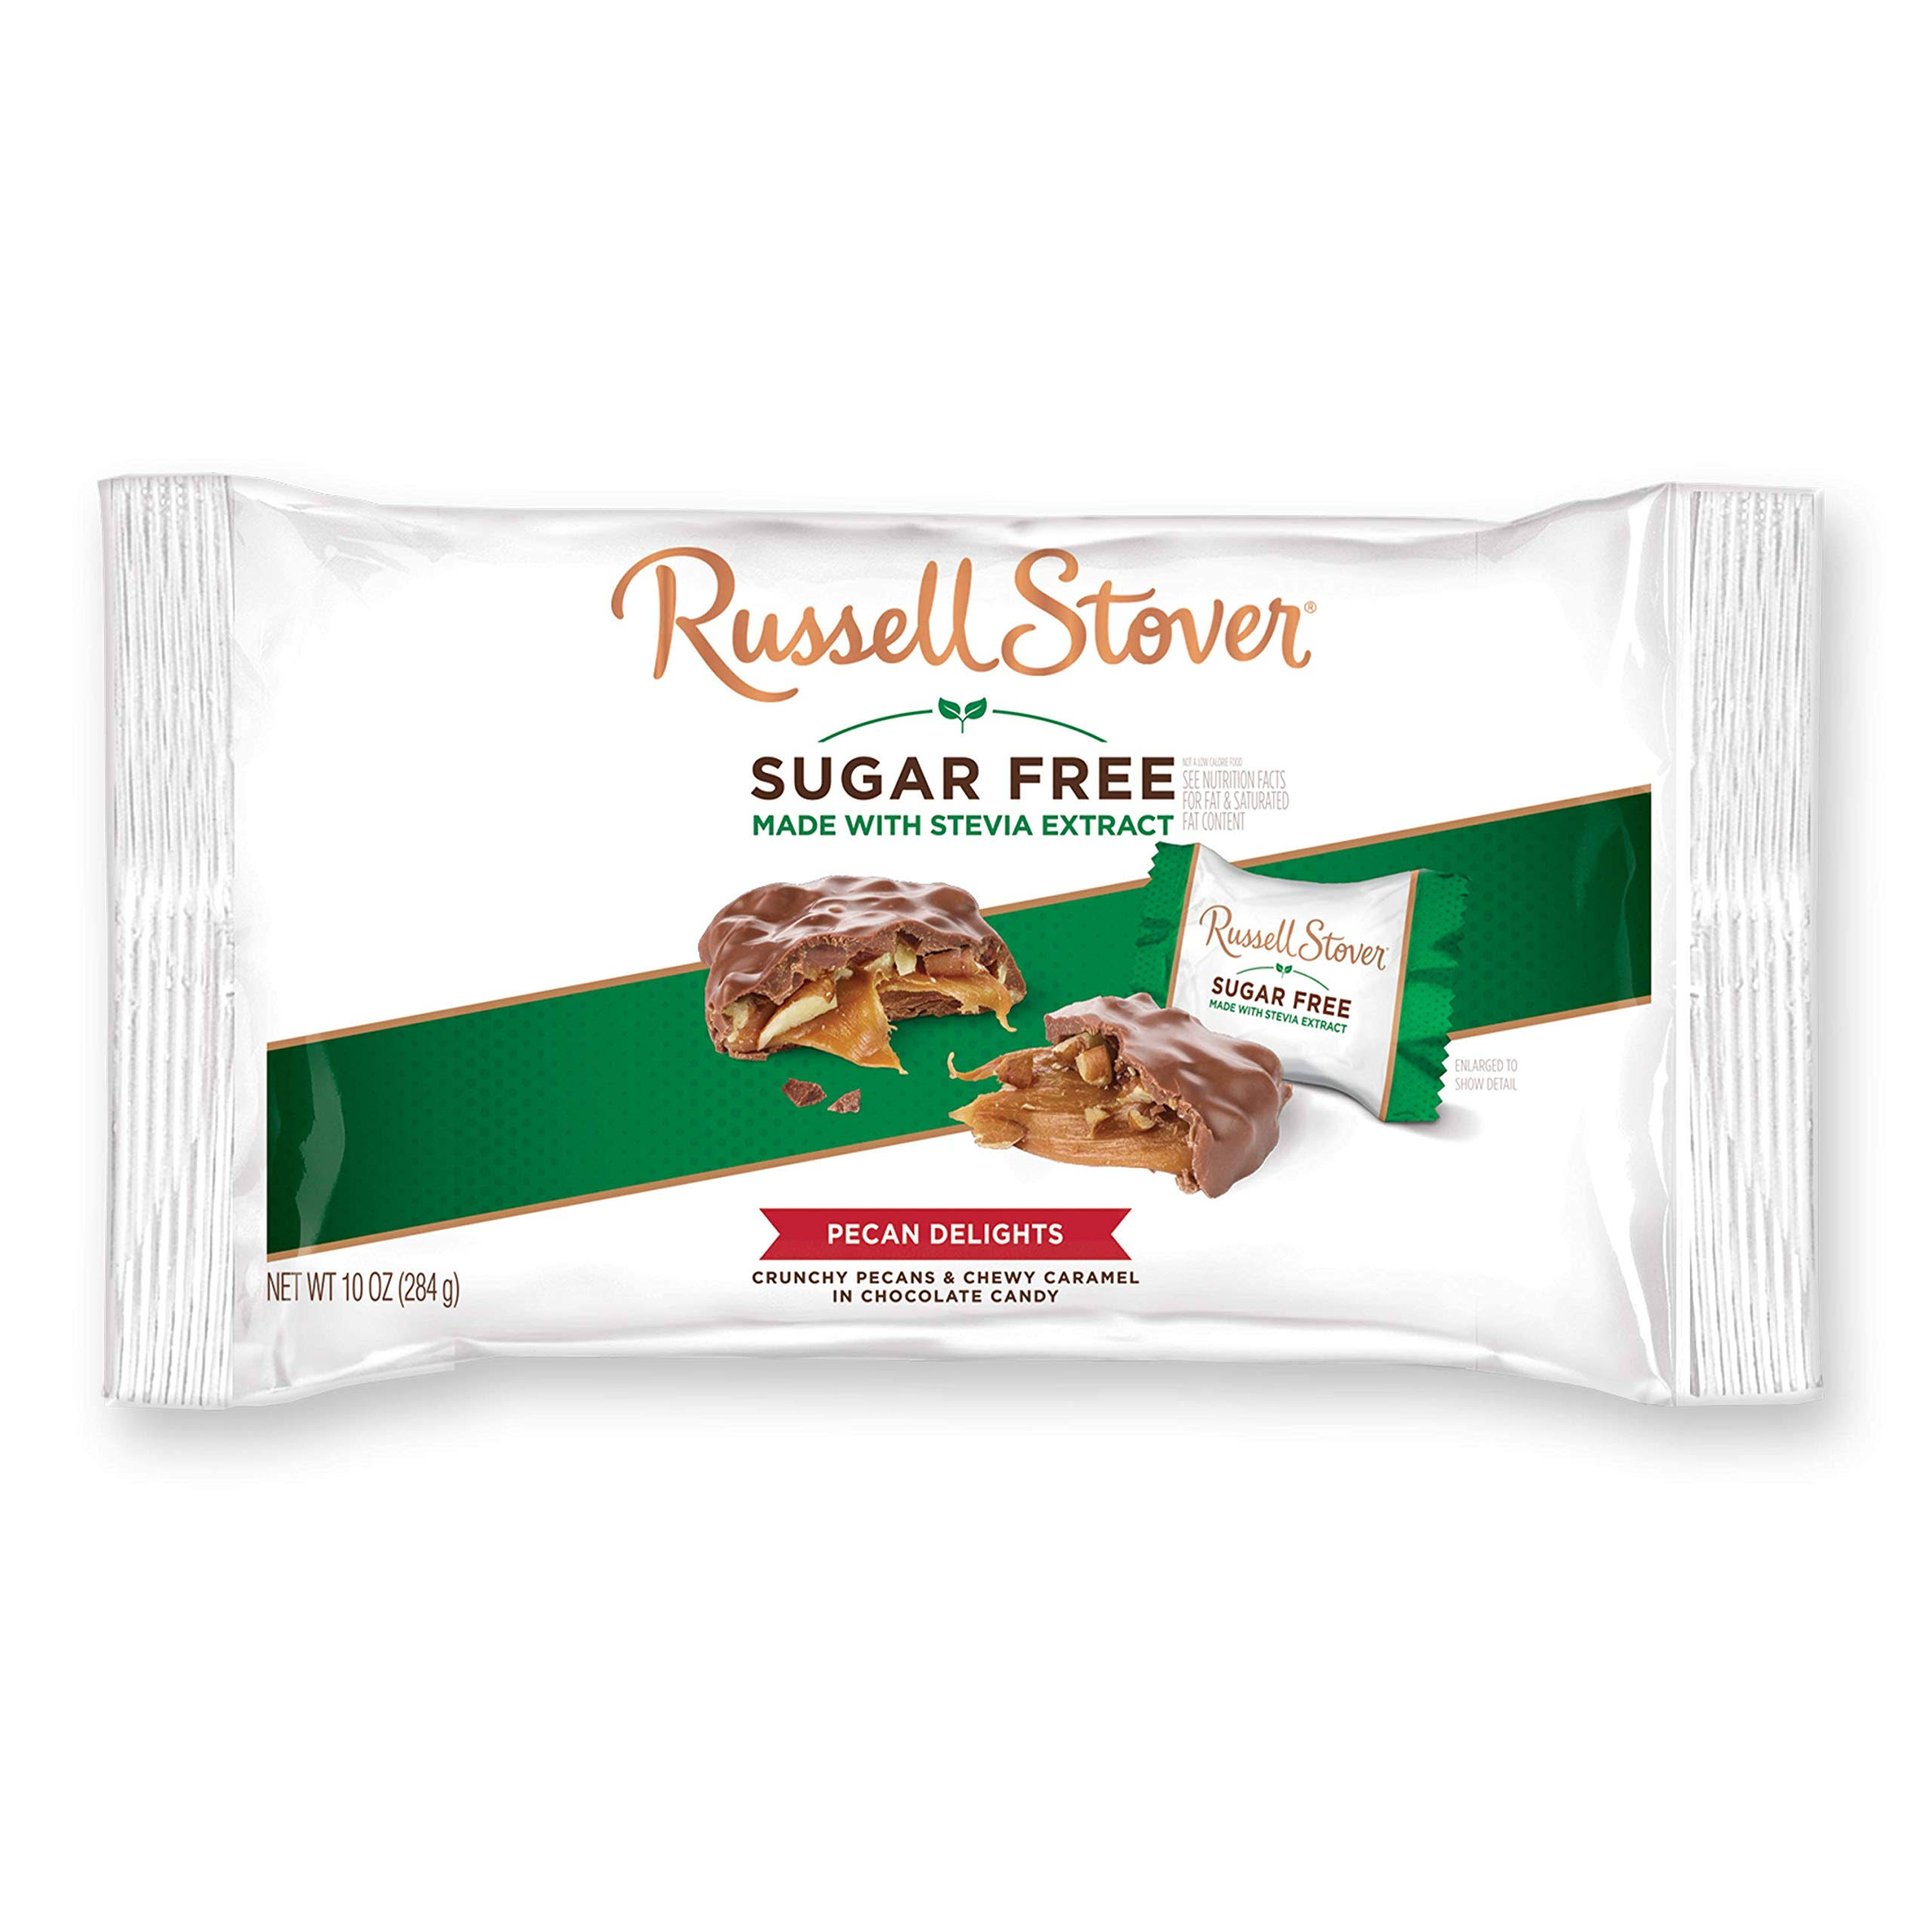 Russell Stover Sugar Free Milk Chocolate - Pecan Delights, 10oz